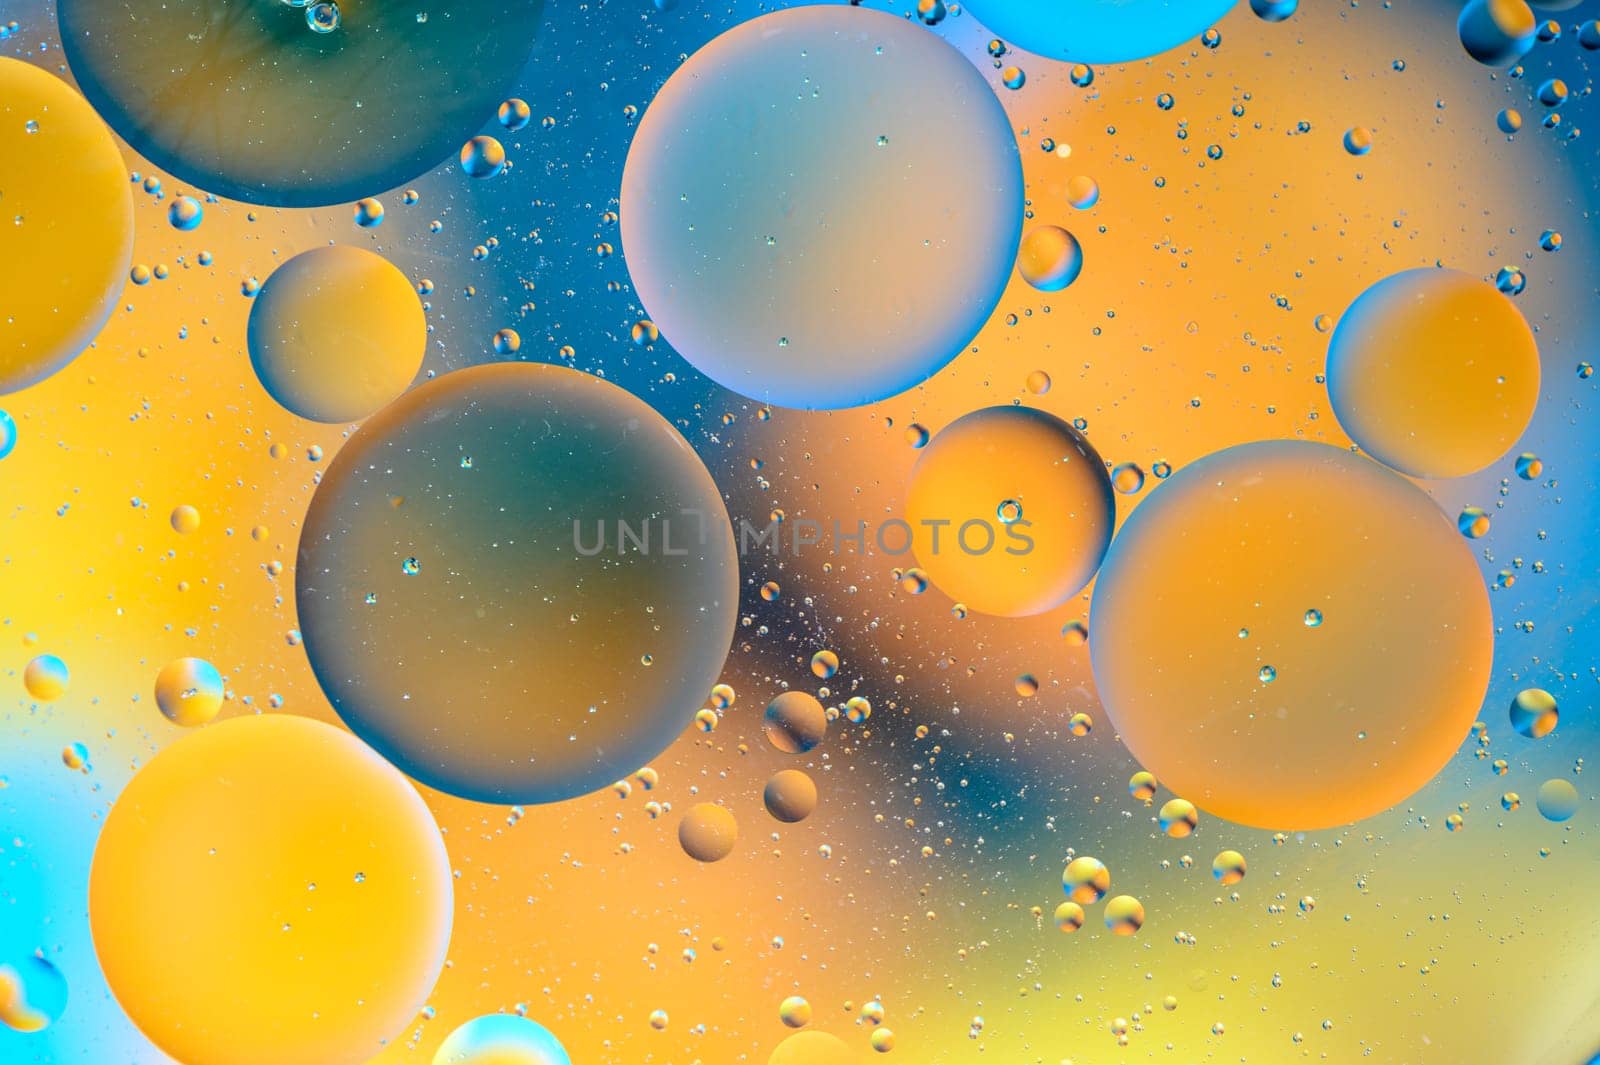 abstract background of multi-colored spots and circles microcosm universe galaxy 20 by Mixa74